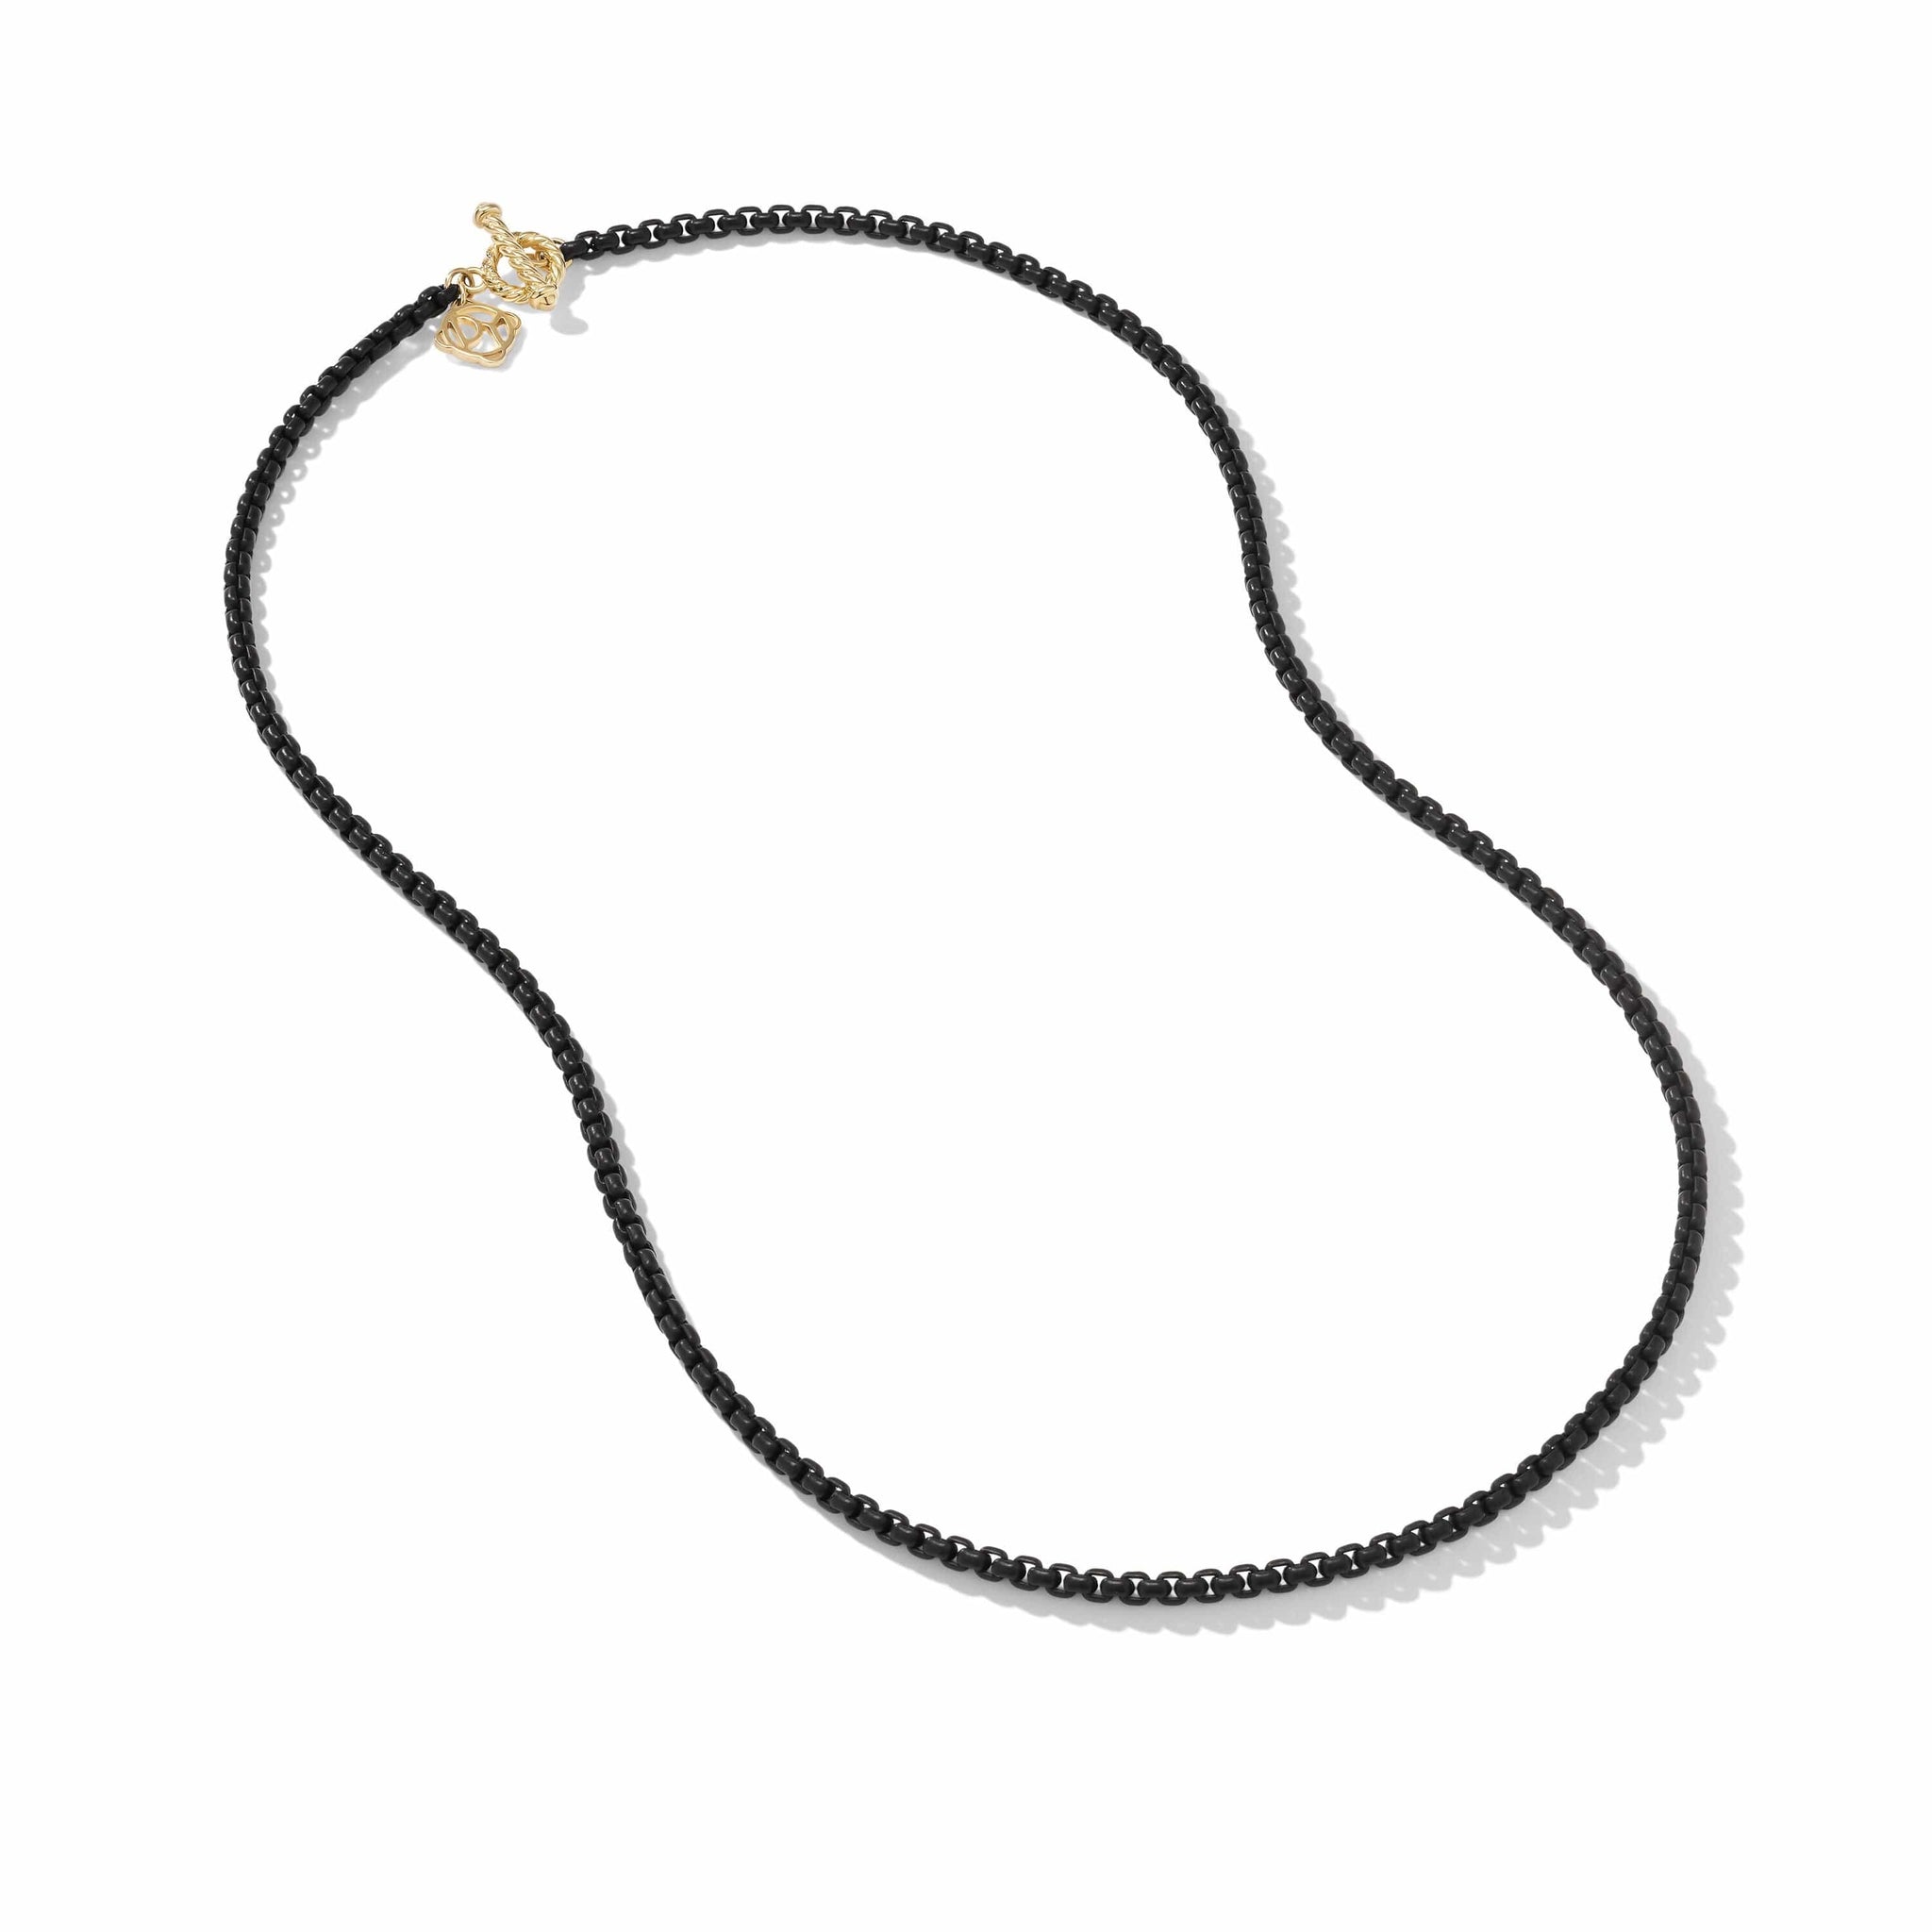 DY Bel Aire Box Chain Necklace in Black with 14K Yellow Gold Accent